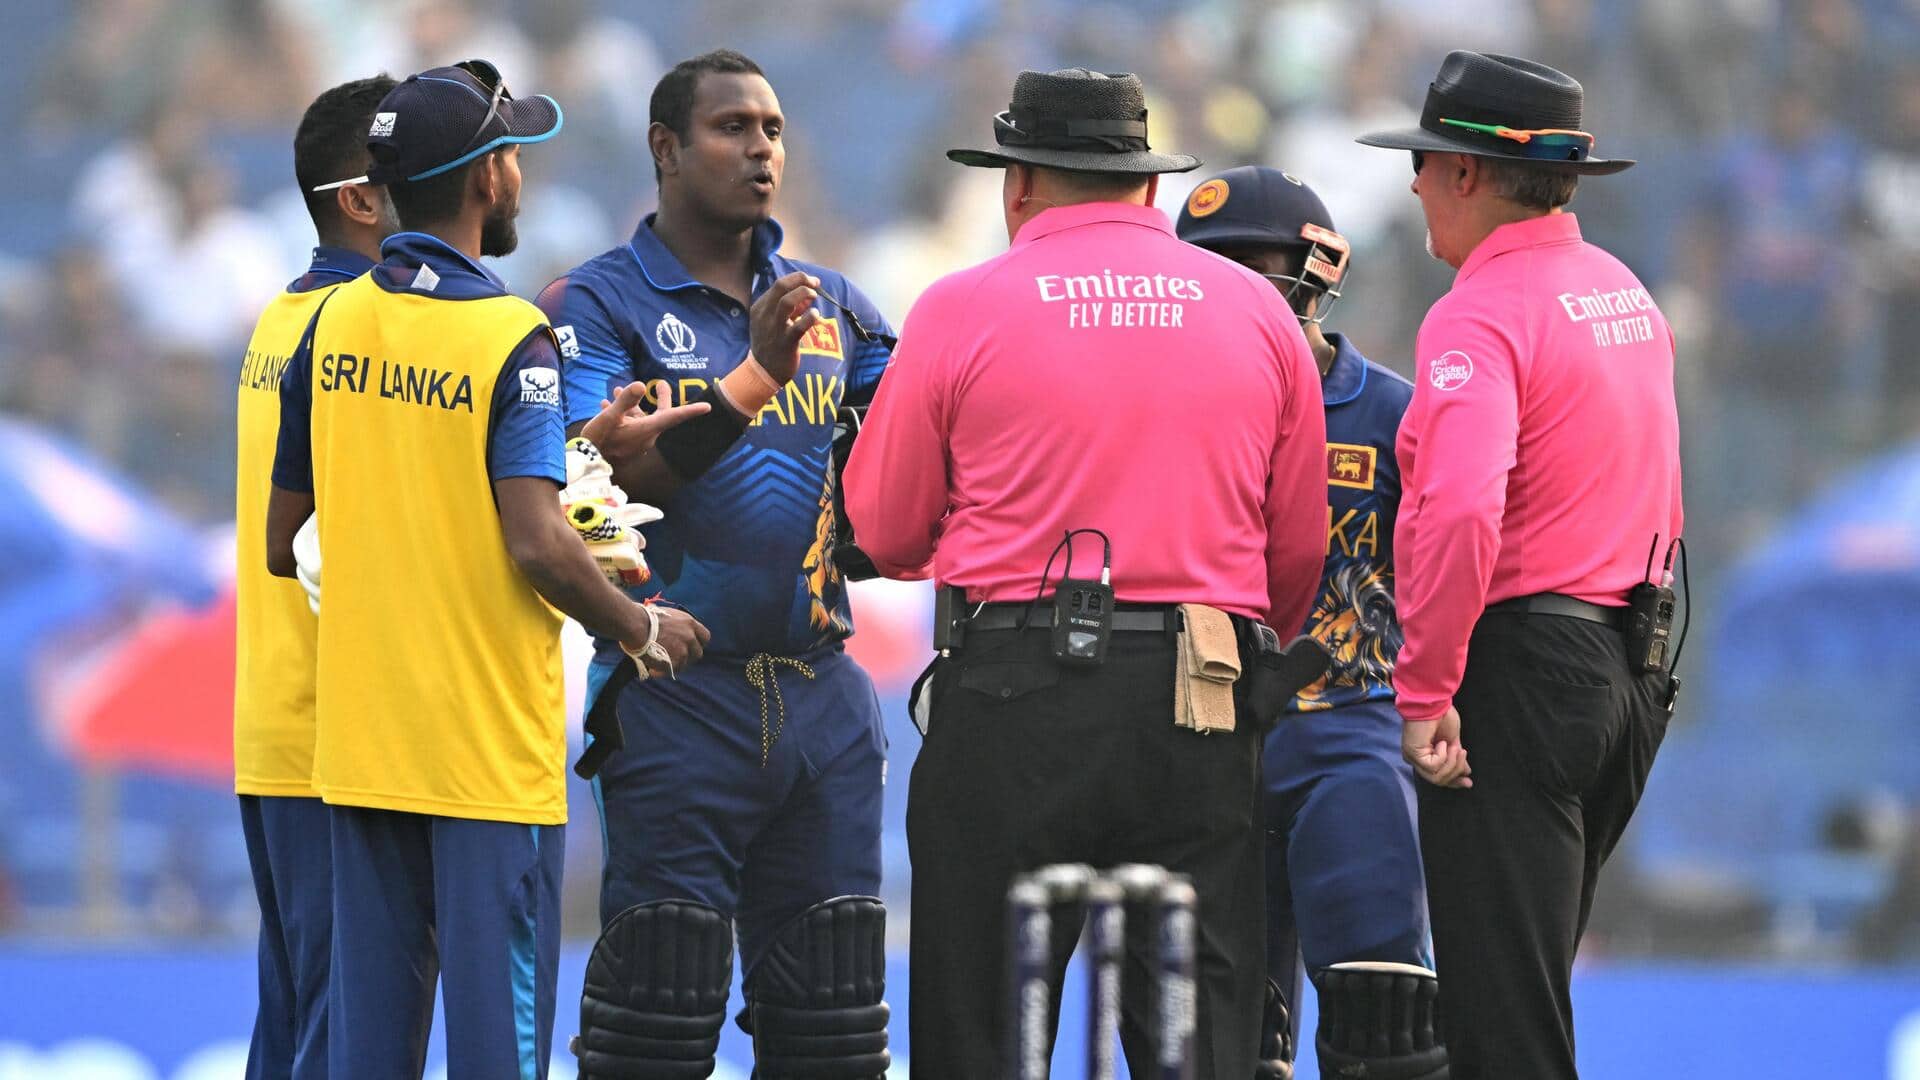 ICC introduces stop clock in men's ODI and T20I cricket